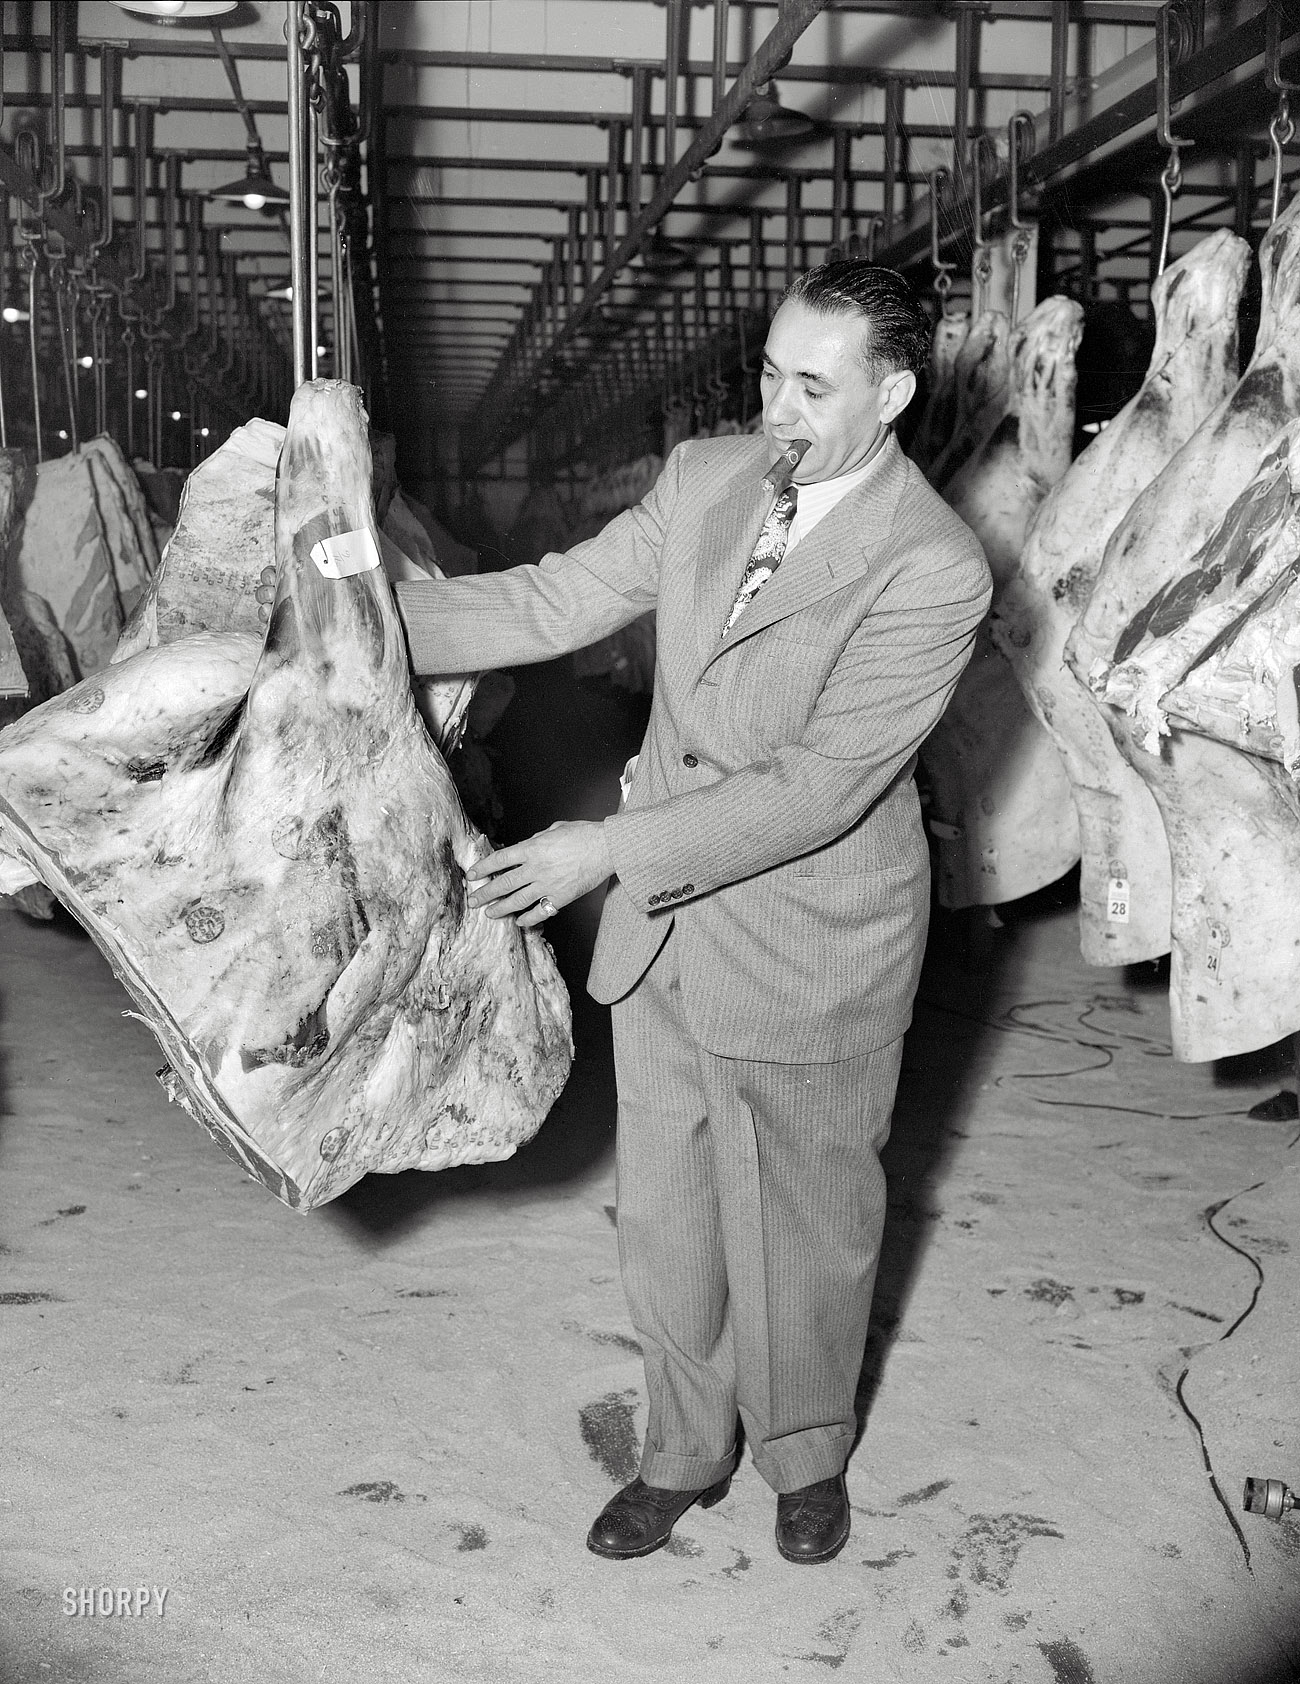 July 1943. "Examining meat in a wholesale meat market. A reconstruction photographed during the filming of Black Marketing, a motion picture produced by the U.S. Office of War Information." Photo by Roger Smith. View full size.